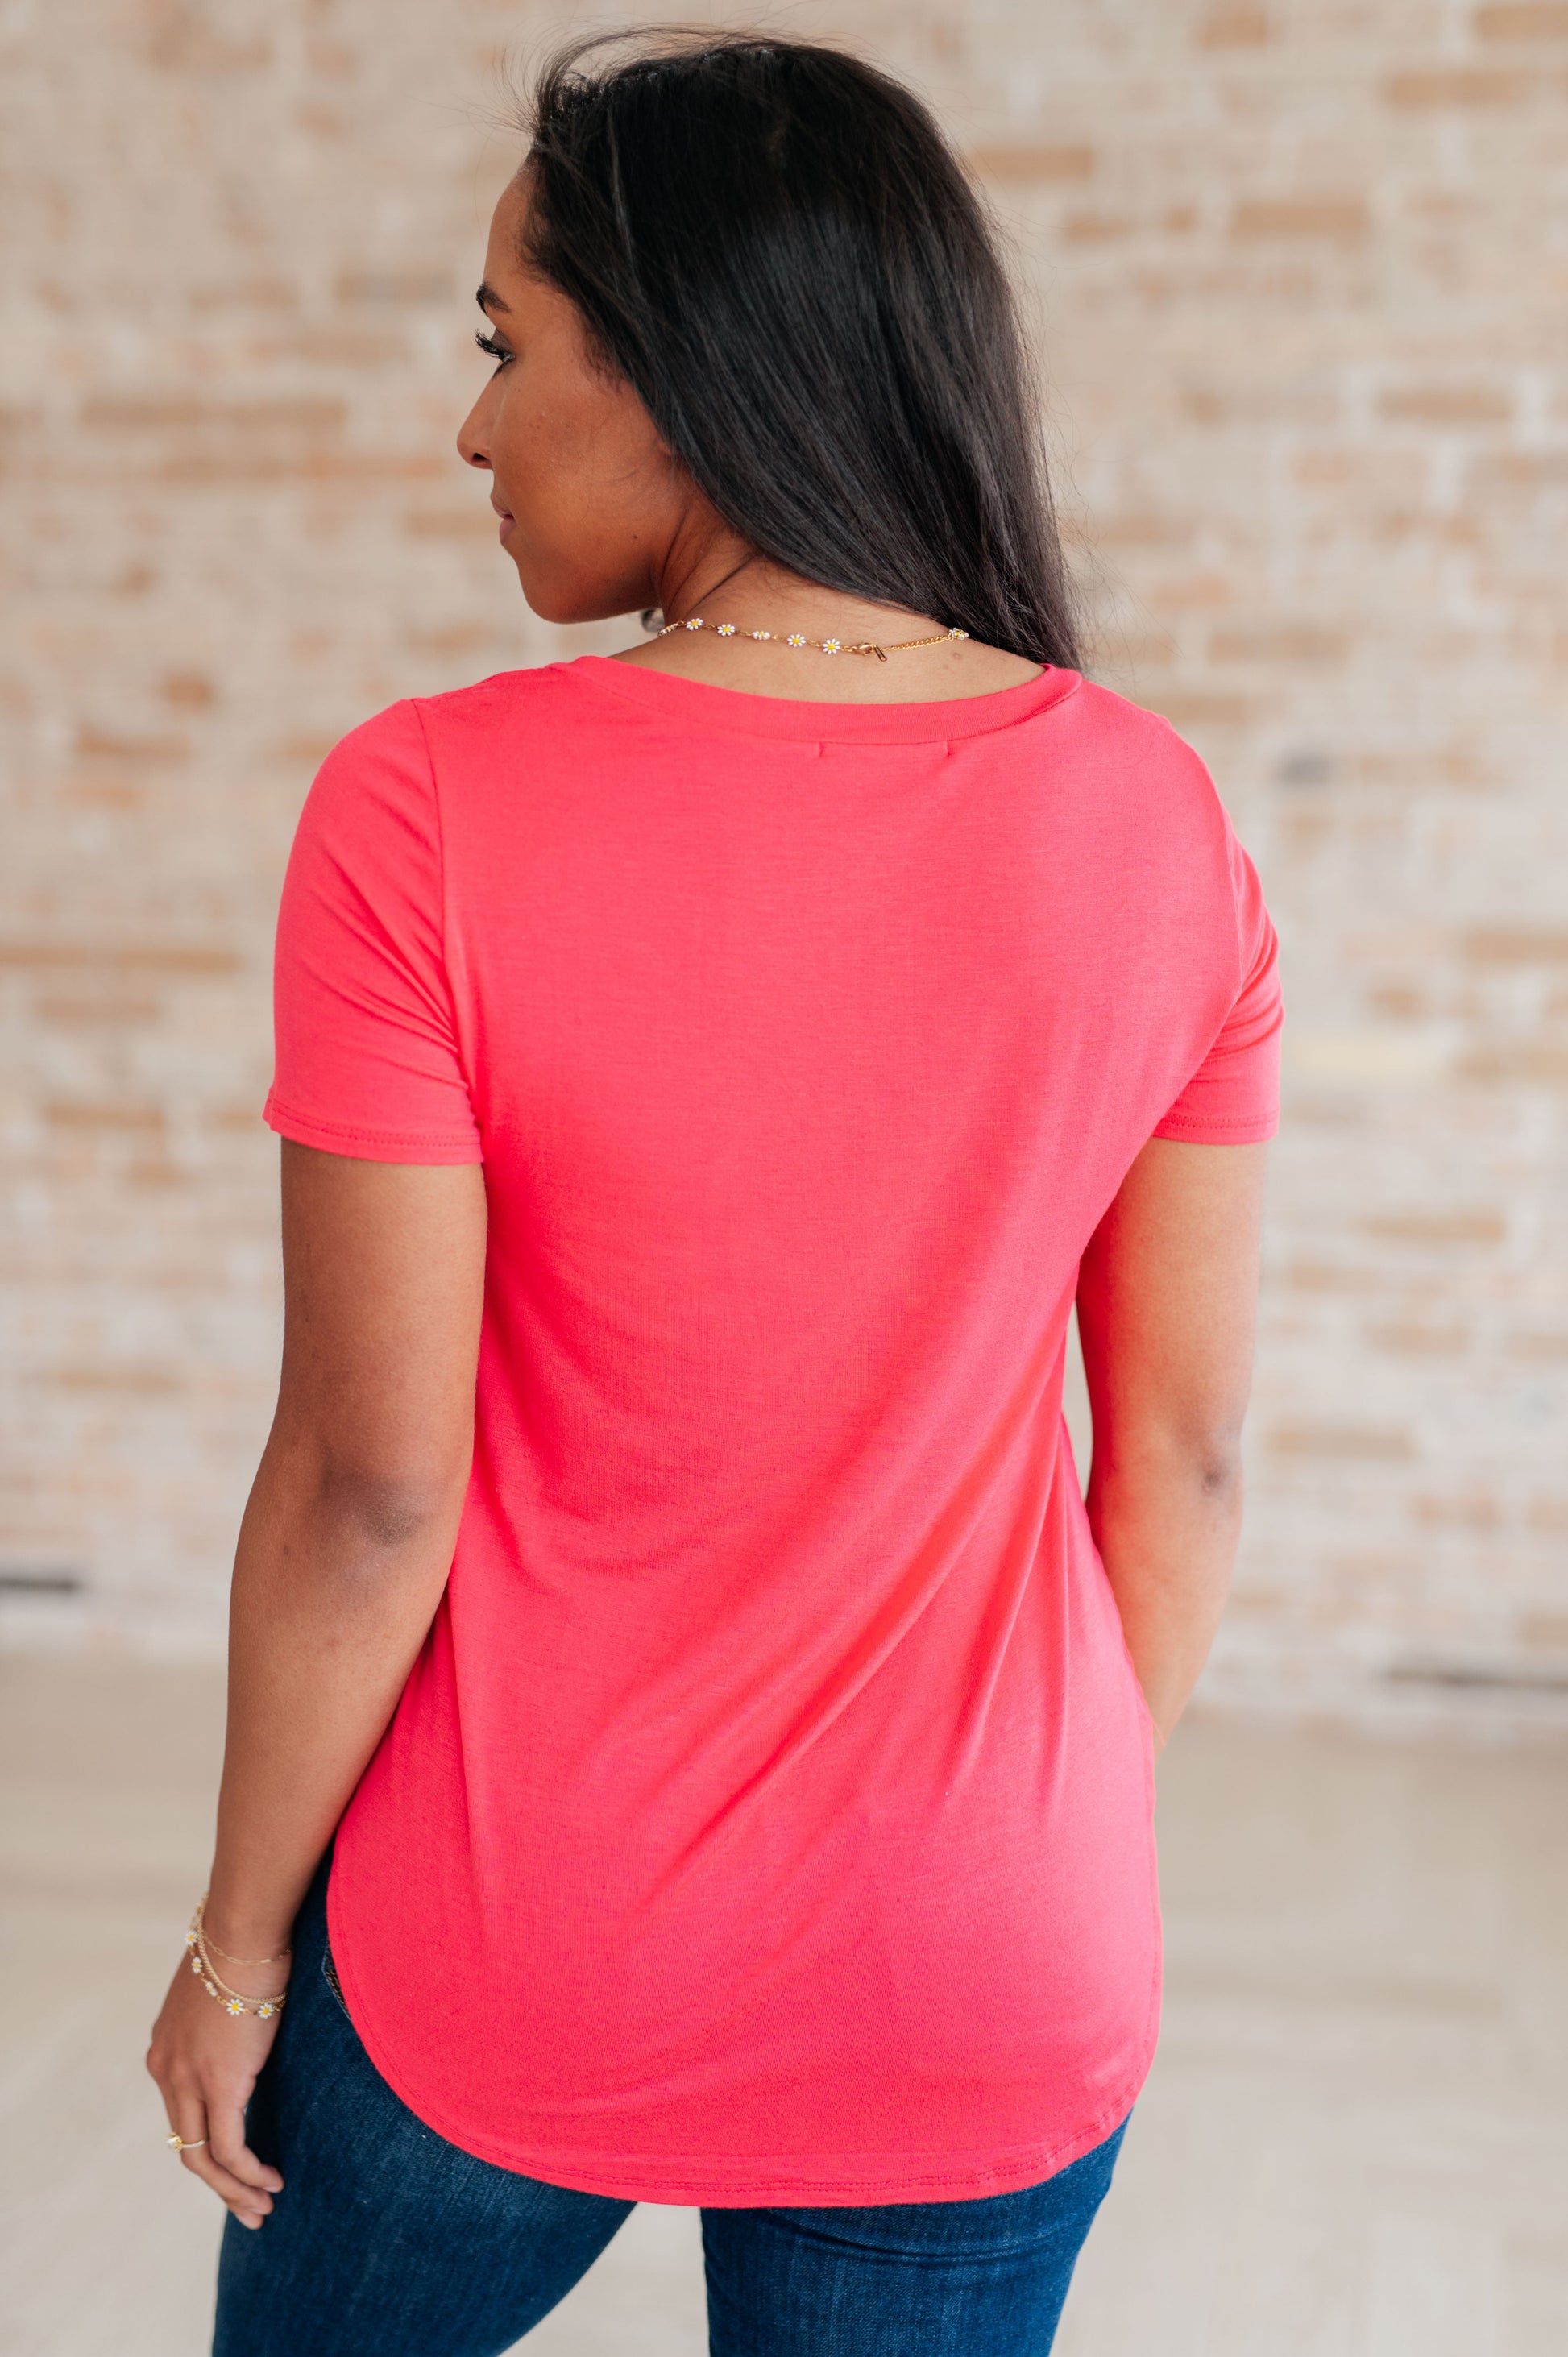 Back to the Basics Top - Dixie Hike & Style